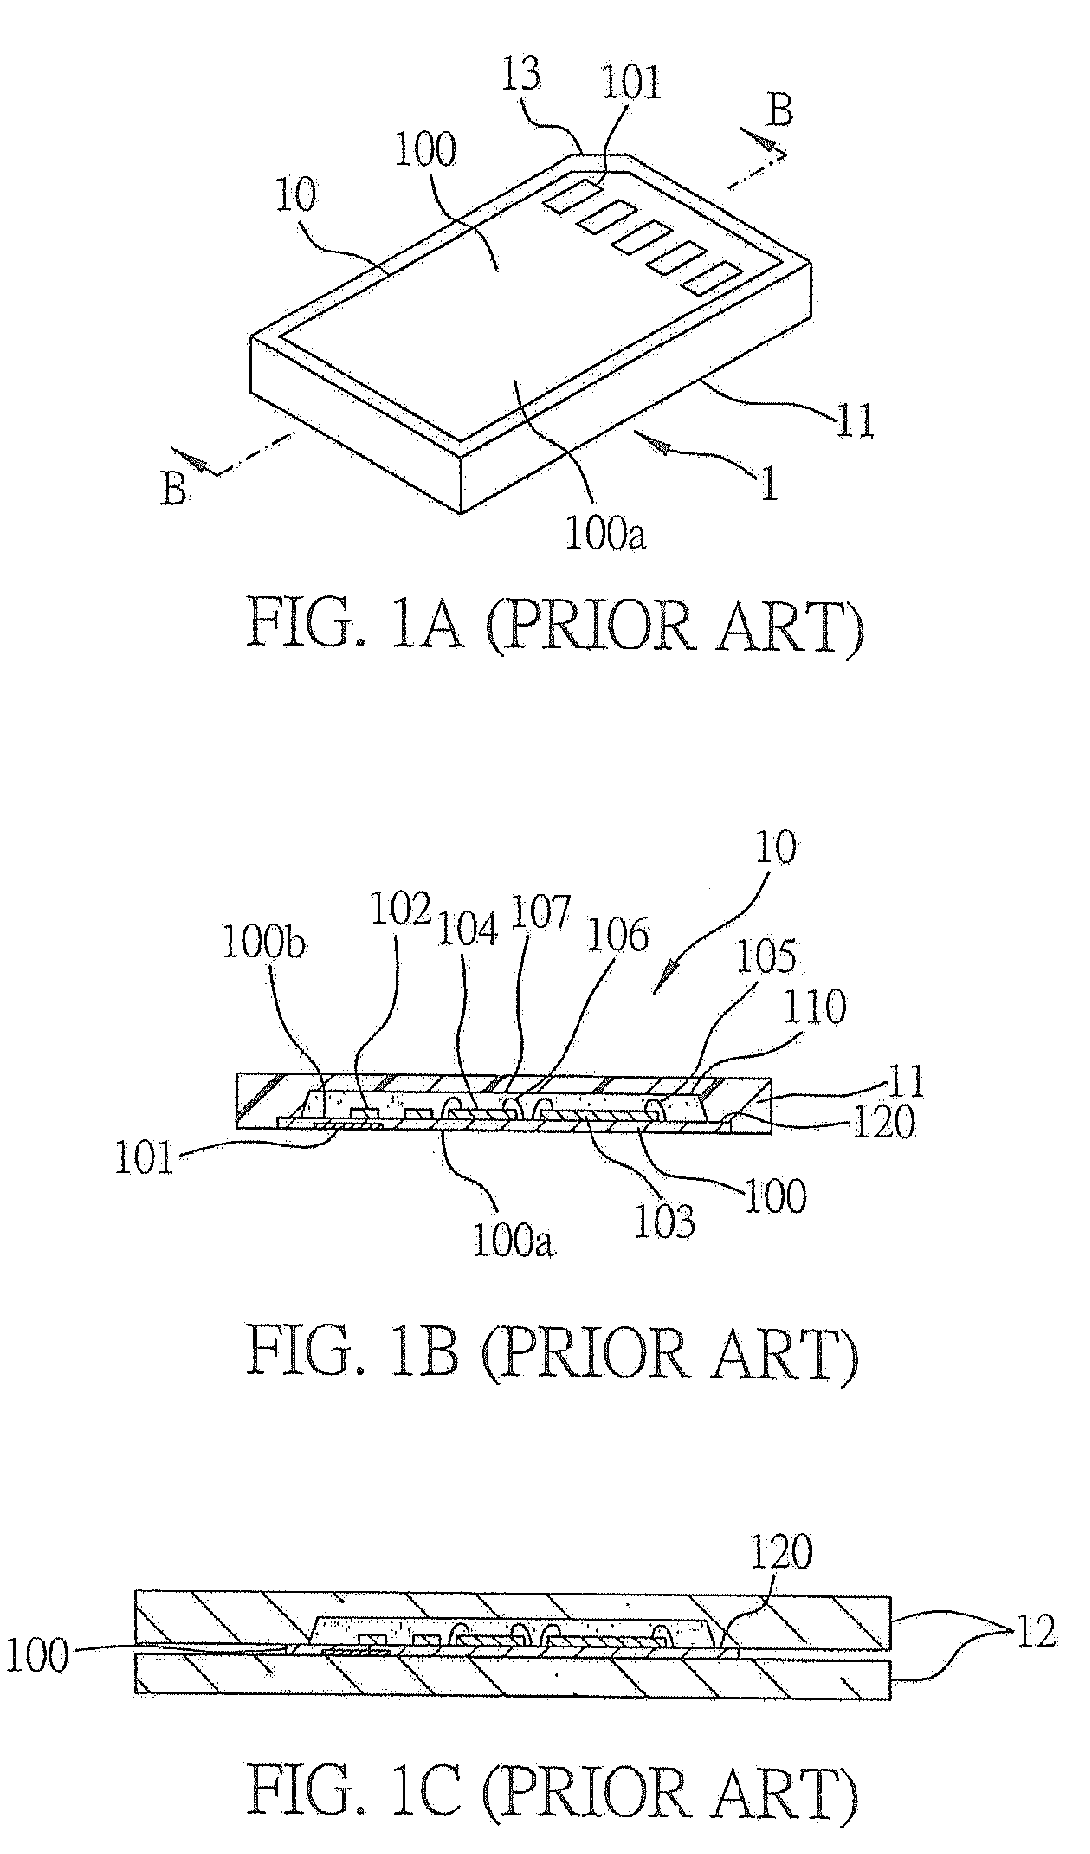 Semiconductor device for use as multimedia memory card, has encapsulant with chamfer such that portion of substrate and chamfer are exposed from encapsulant and remaining portion of surface of substrate is covered by encapsulant